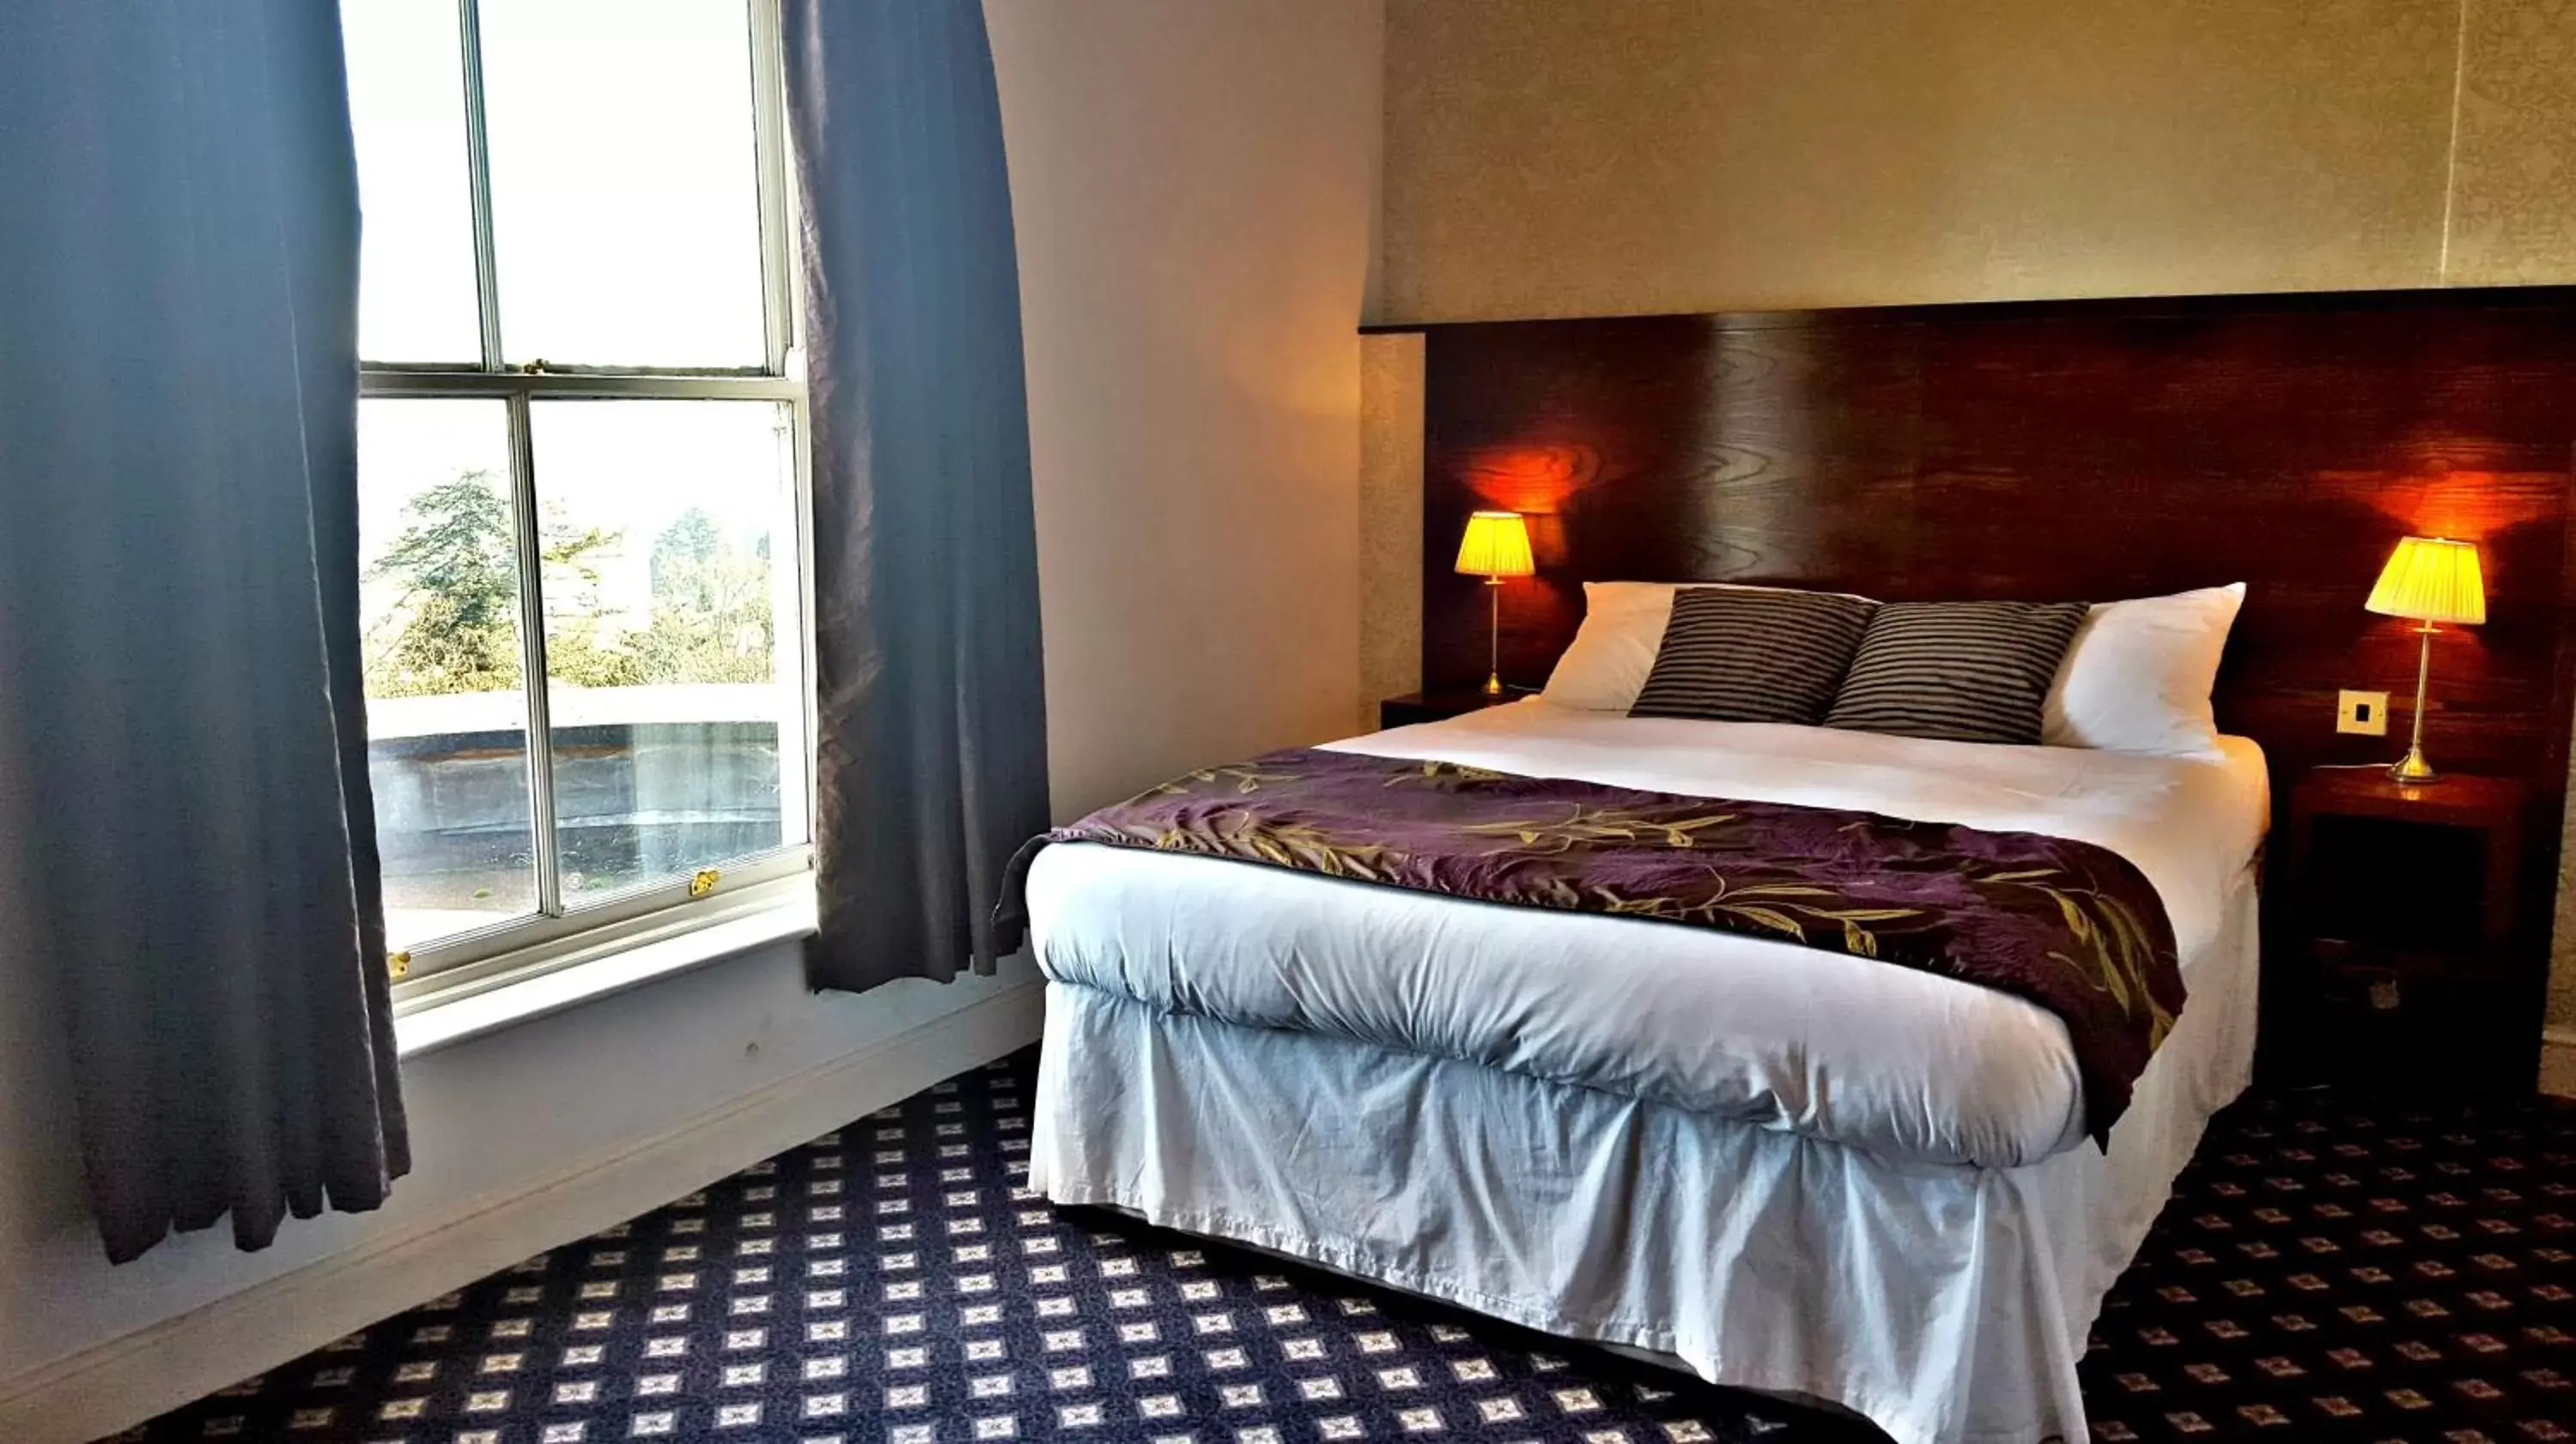 Feature Double Room in The Foley Arms Hotel Wetherspoon